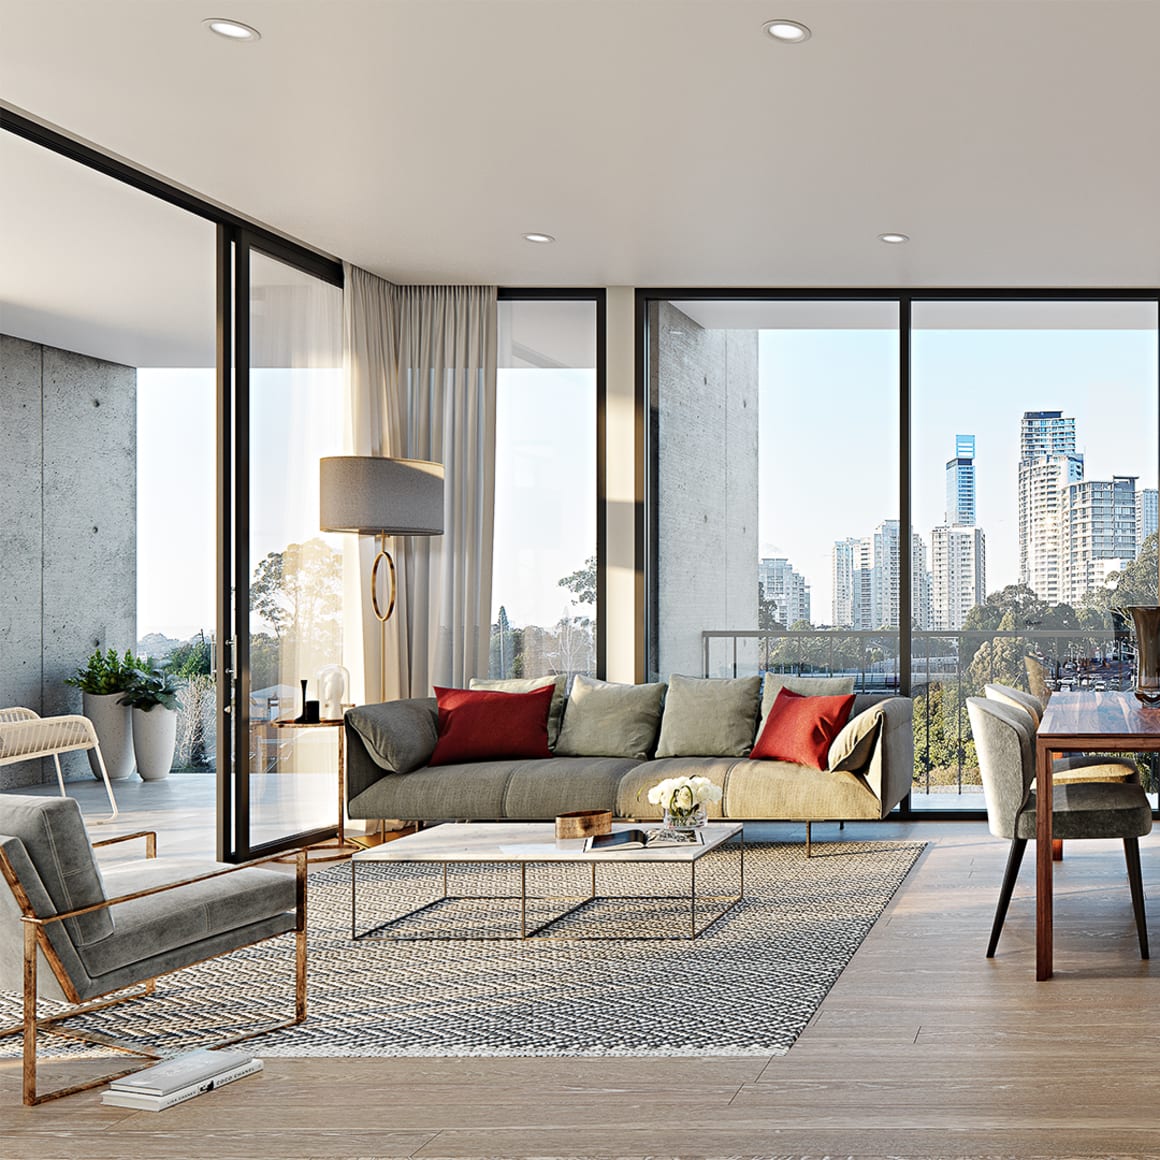 Seymours Residences, Chatswood begins construction December 2020